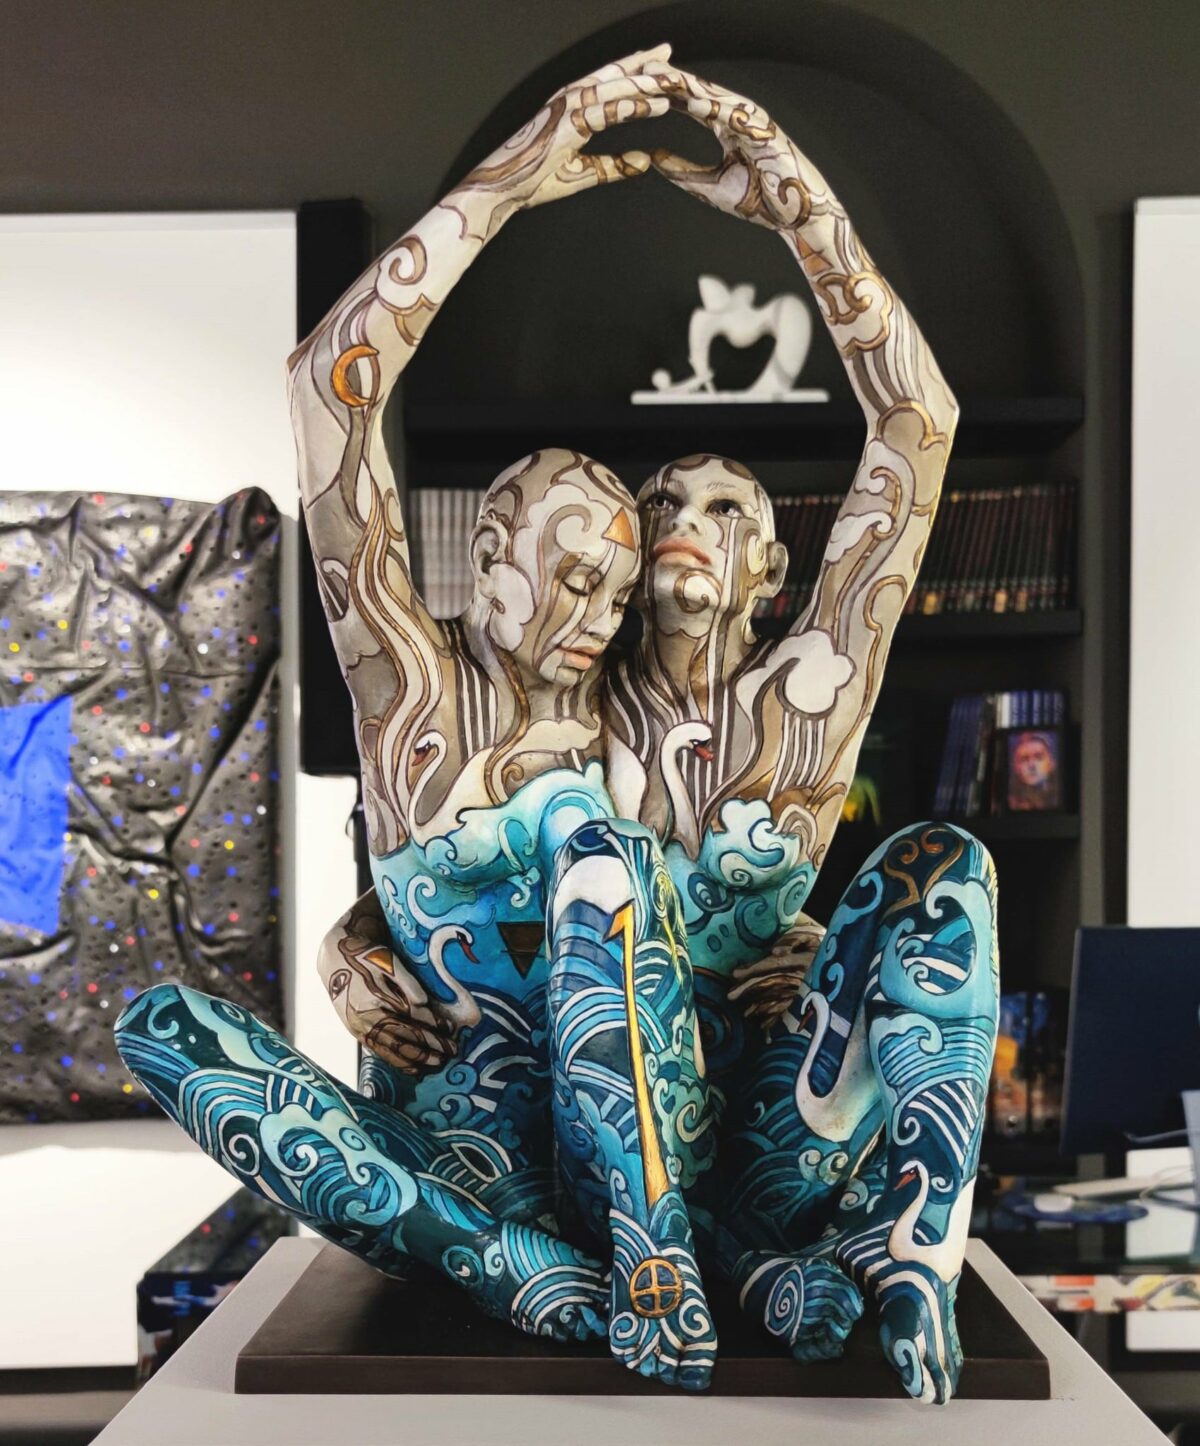 Expressive Figurative Sculptures Gorgeously Covered By Colorful Patterns By Paola Epifani Rabarama 12